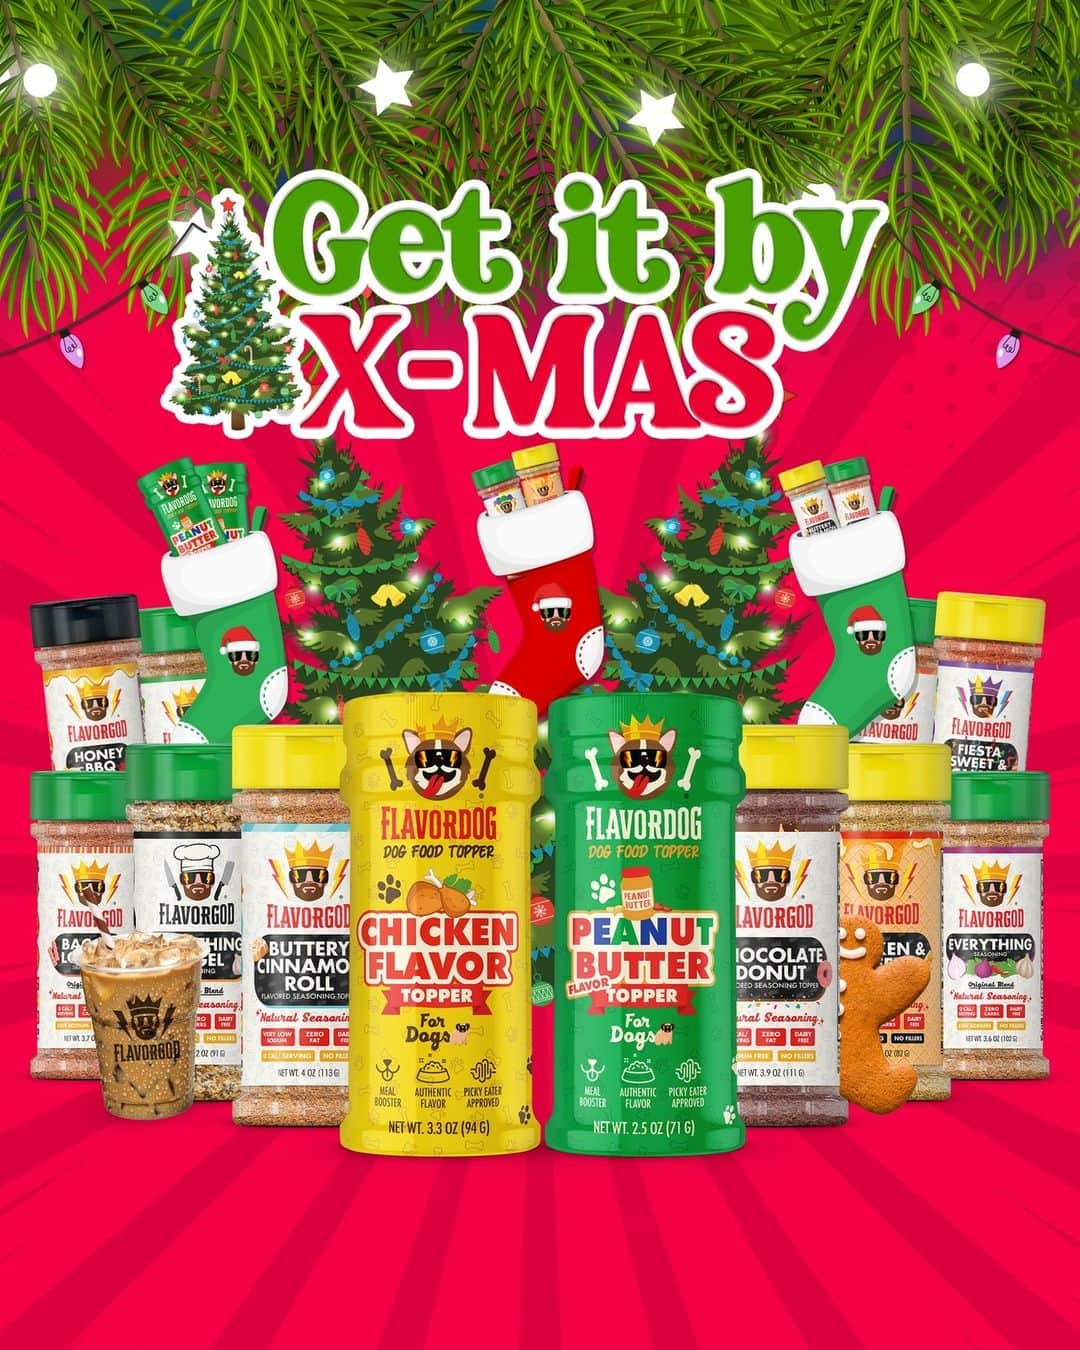 Flavorgod Seasoningsのインスタグラム：「🎅❗Get it before Christmas!🎁❗Shop Now!!⁠ Click link in the bio -> @flavorgod | www.flavorgod.com⁠🎄🎅⁠ -⁠ Flavor God Seasonings are:⁠ 🎅ZERO CALORIES PER SERVING⁠ 🎄MADE FRESH⁠ 🎅MADE LOCALLY IN US⁠ 🎄FREE GIFTS AT CHECKOUT⁠ 🎅GLUTEN FREE⁠ 🎄#PALEO & #KETO FRIENDLY⁠ -⁠ #food #foodie #flavorgod #seasonings #glutenfree #mealprep #seasonings #breakfast #lunch #dinner #yummy #delicious #foodporn」